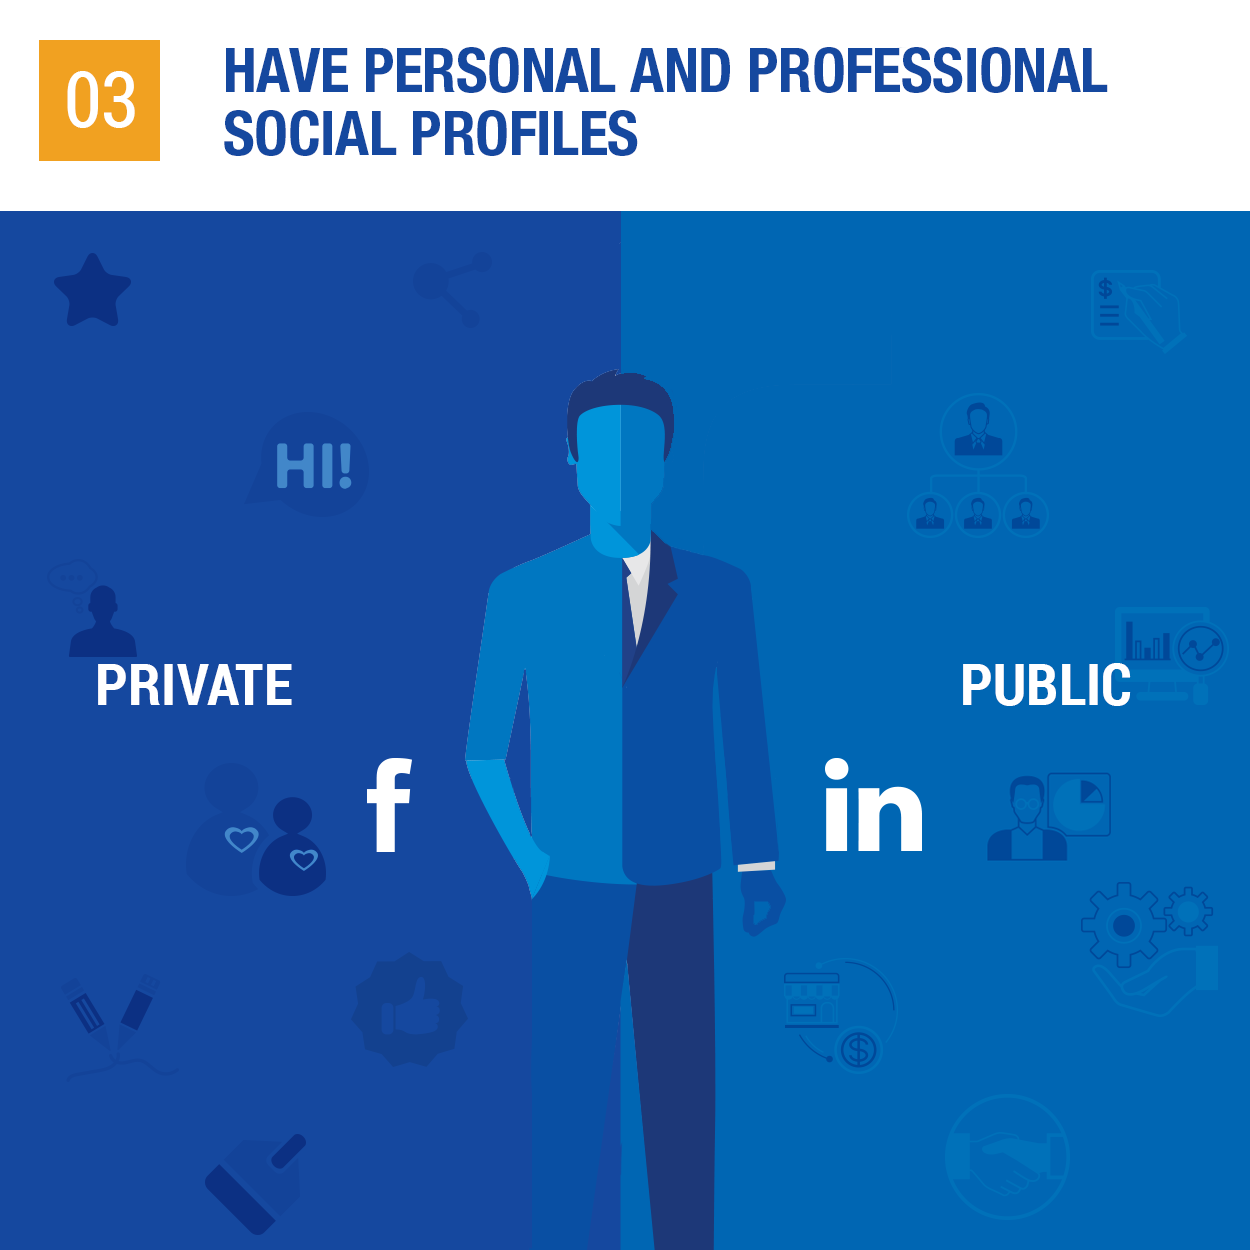 Have personal and professional social profiles